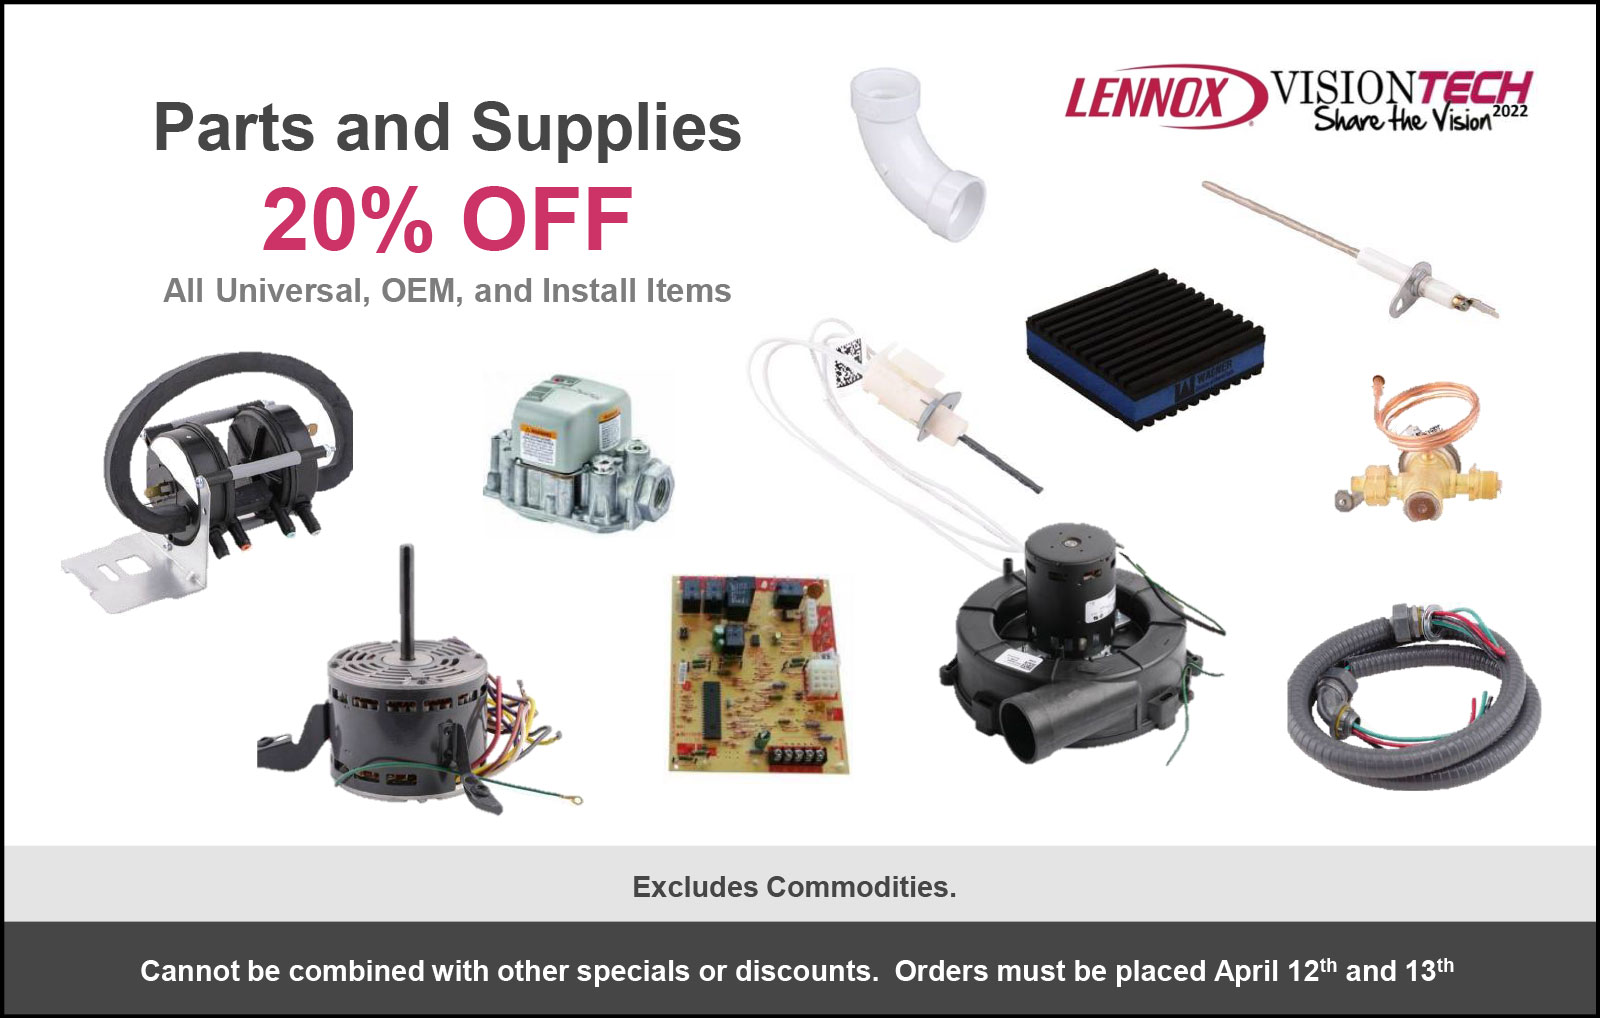 Lennox Parts and Supplies